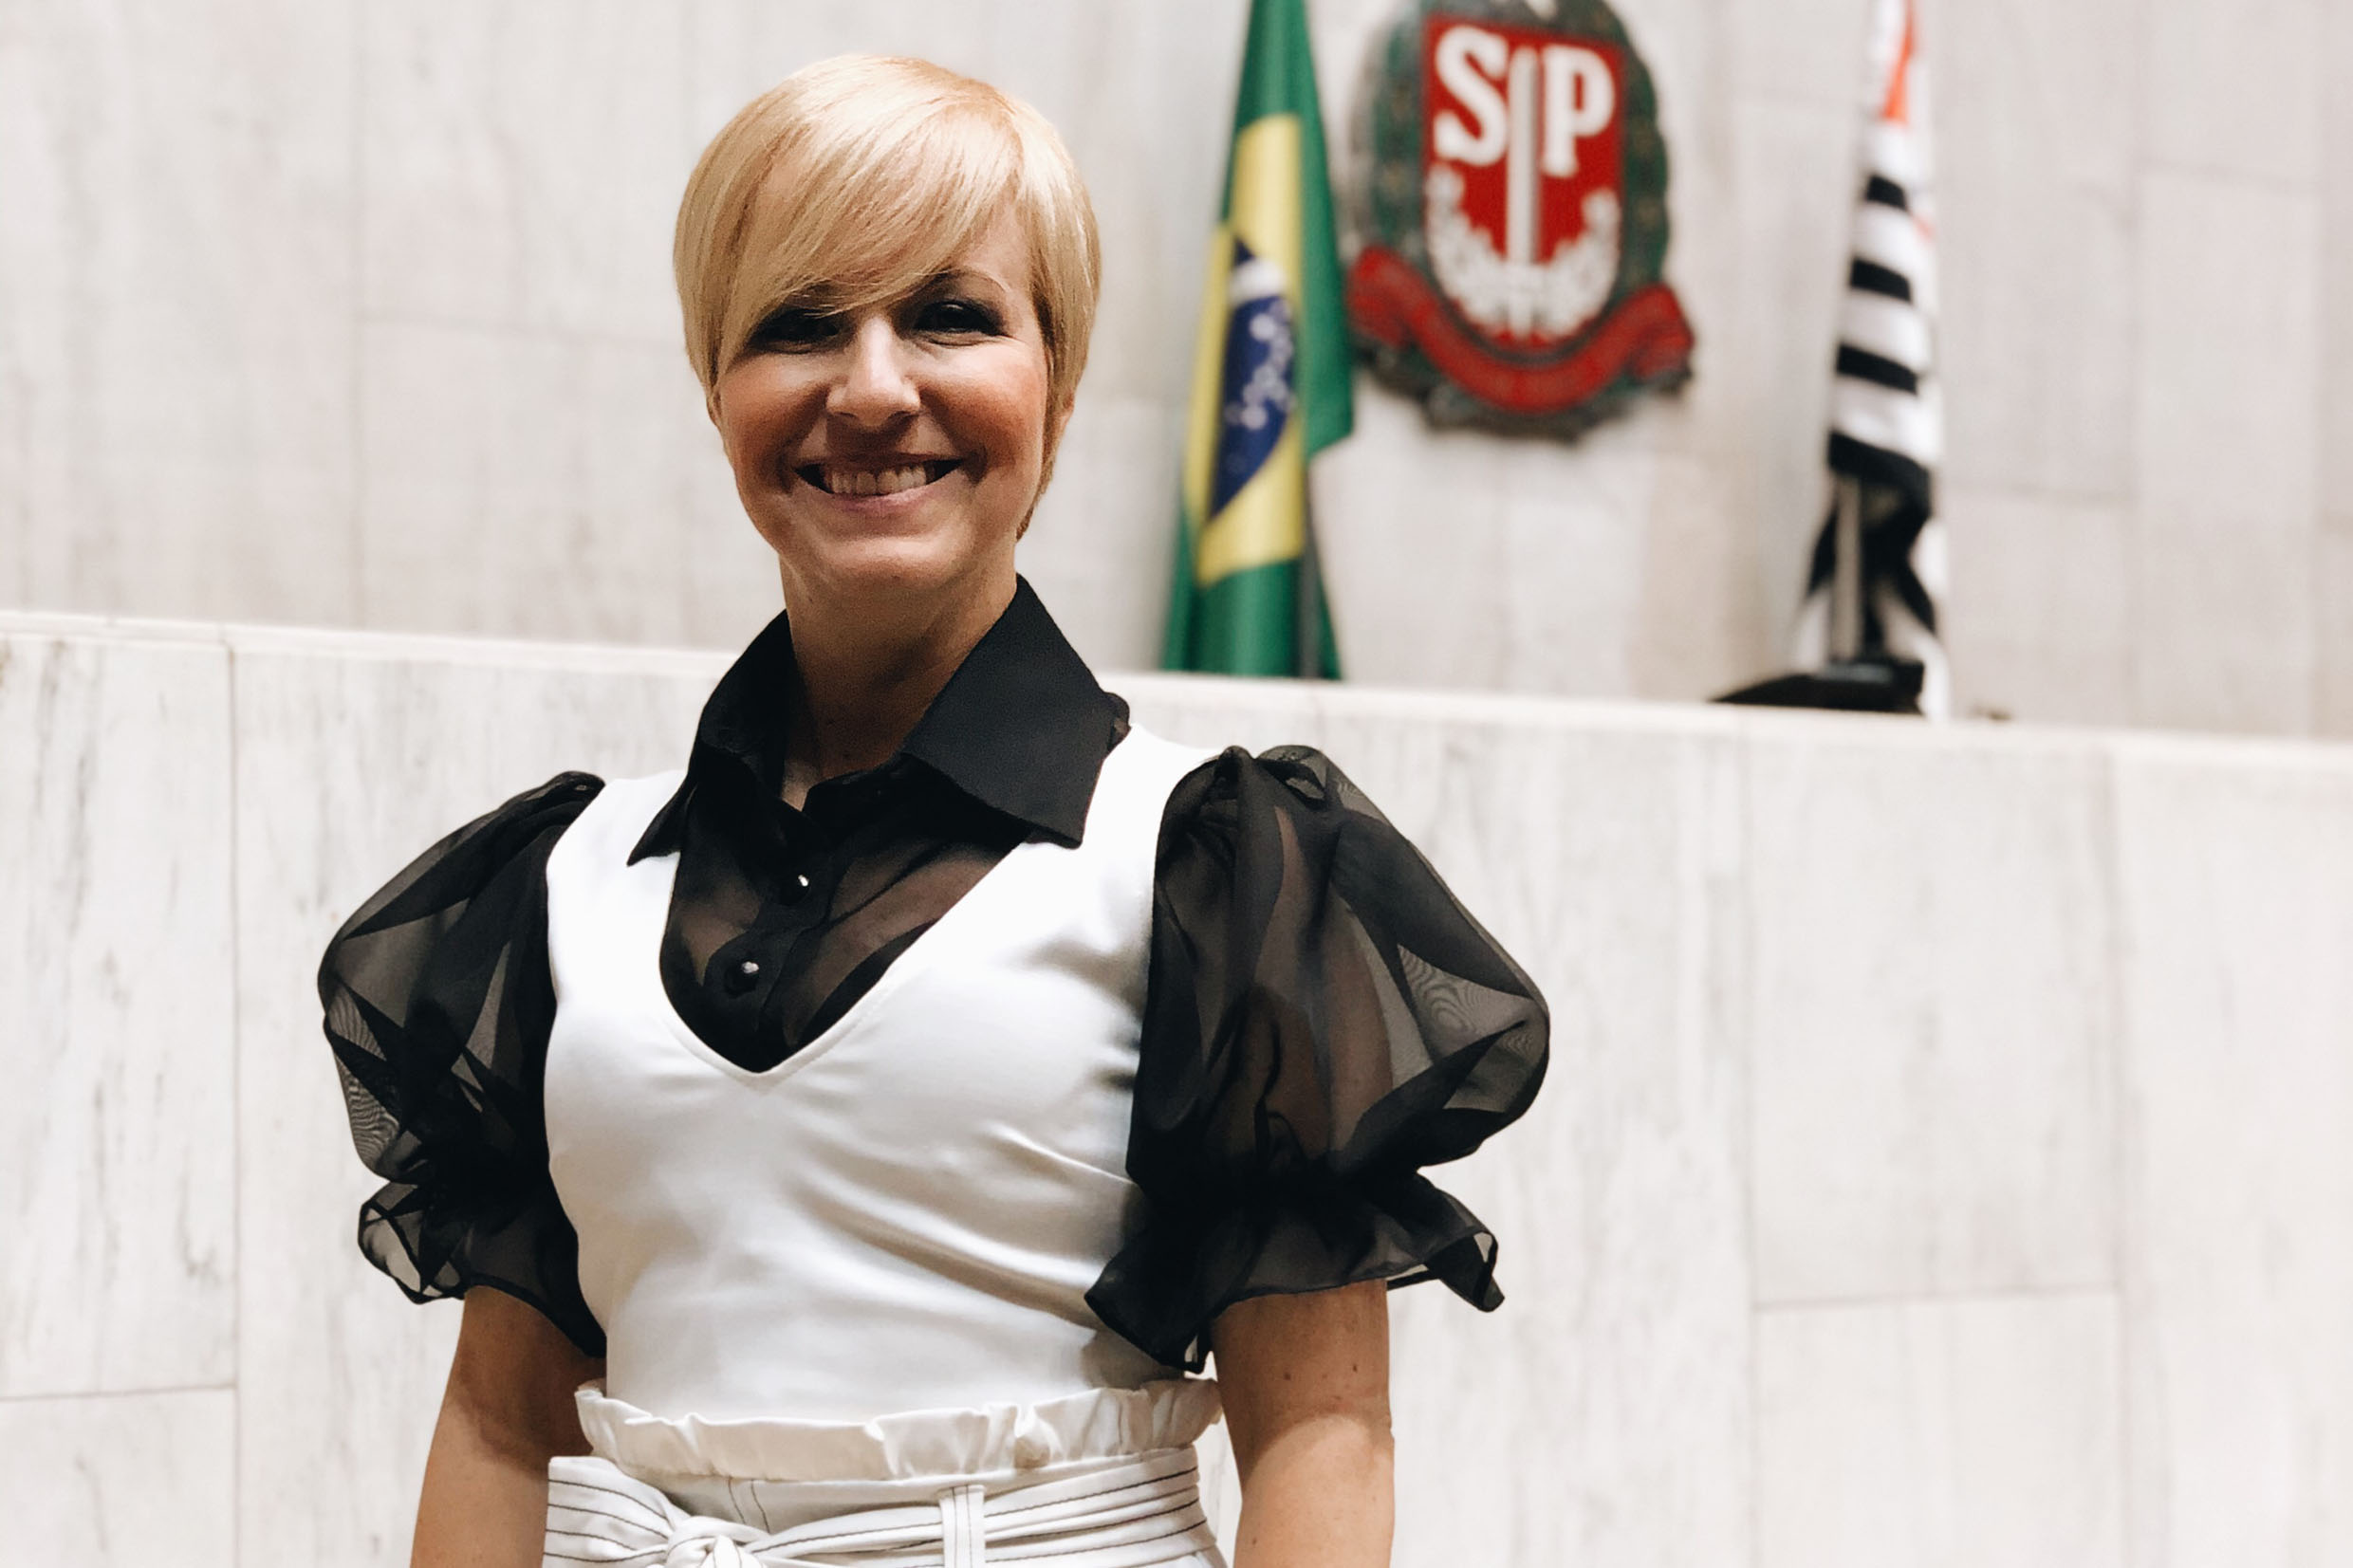 Dra. Damaris Moura<a style='float:right' href='https://www3.al.sp.gov.br/repositorio/noticia/N-01-2021/fg259961.jpg' target=_blank><img src='/_img/material-file-download-white.png' width='14px' alt='Clique para baixar a imagem'></a>